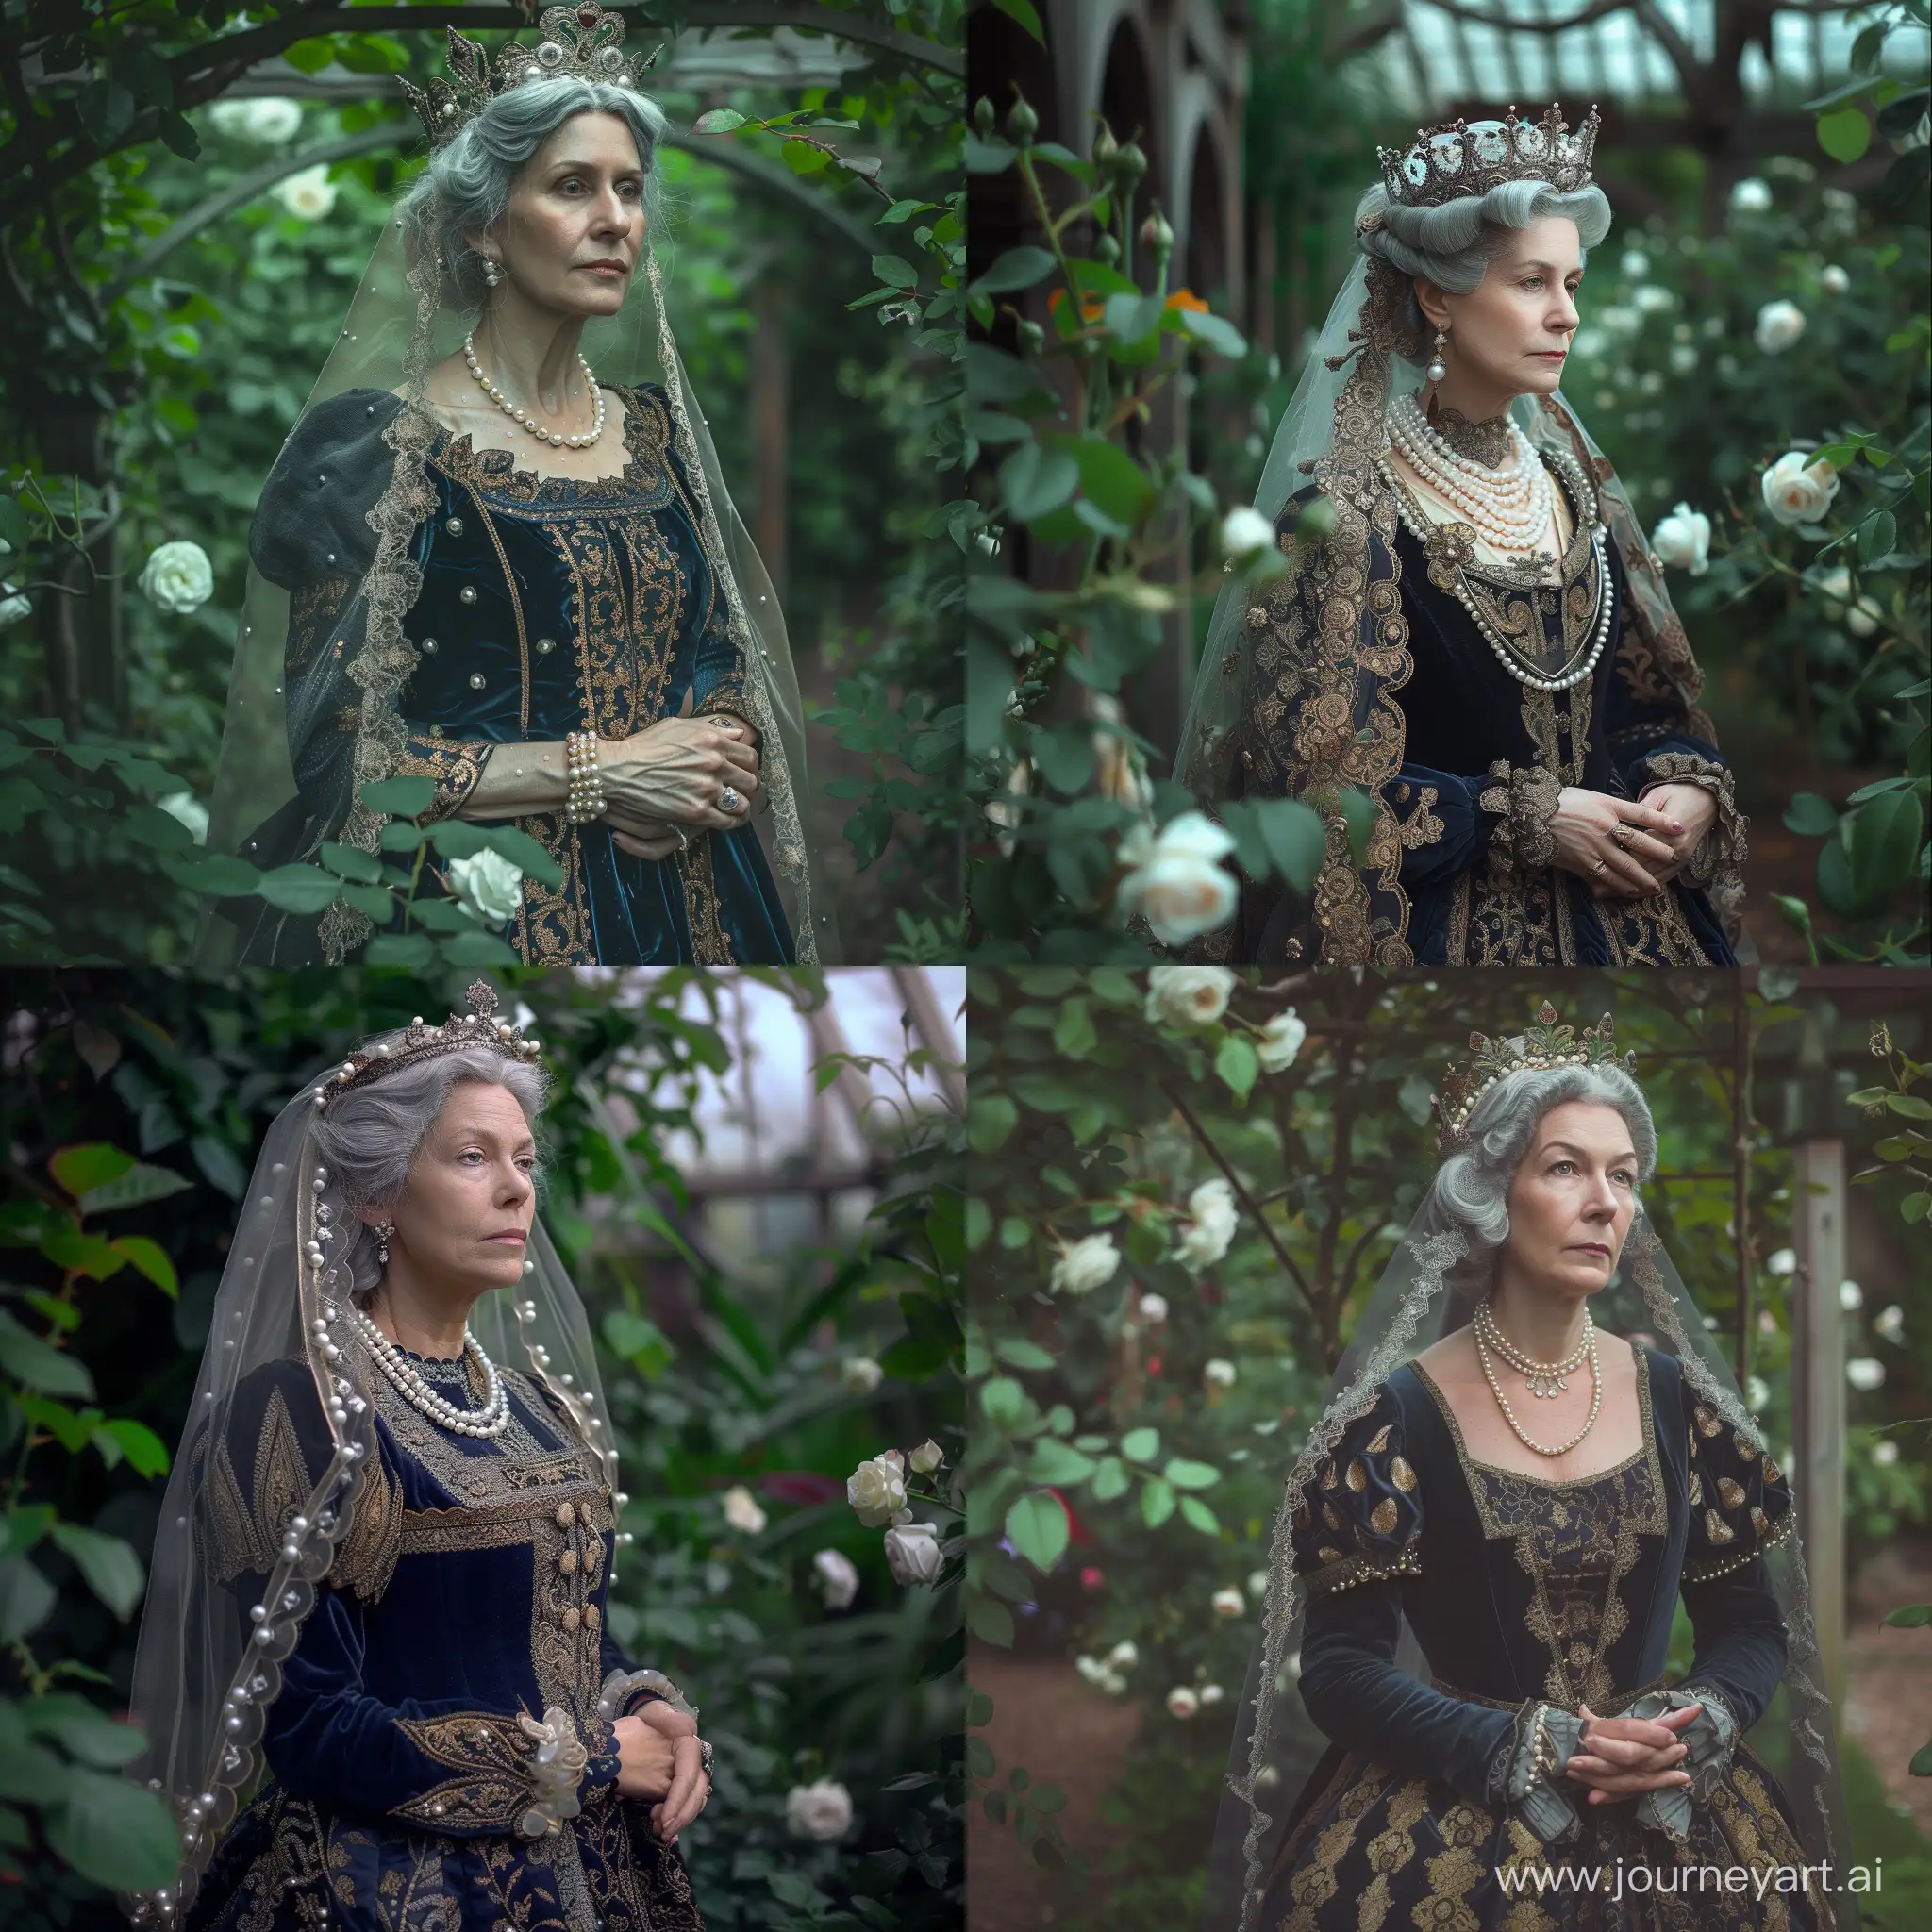 A woman in an elegant historical costume, reminiscent of the clothing of European nobility during the Renaissance, stands in a lush garden. She is dressed in a dark blue dress with gold patterns and rich pearl jewelry. She wears an elegant veil and crown on her head. Her hair is pure grey. Her gaze is directed into the distance, and she holds her hands folded in front of her. There are green plants and flowers growing around her, including a rose bush with white roses. The atmosphere of the image is quiet and thoughtful, with elements of romance and grandeur.